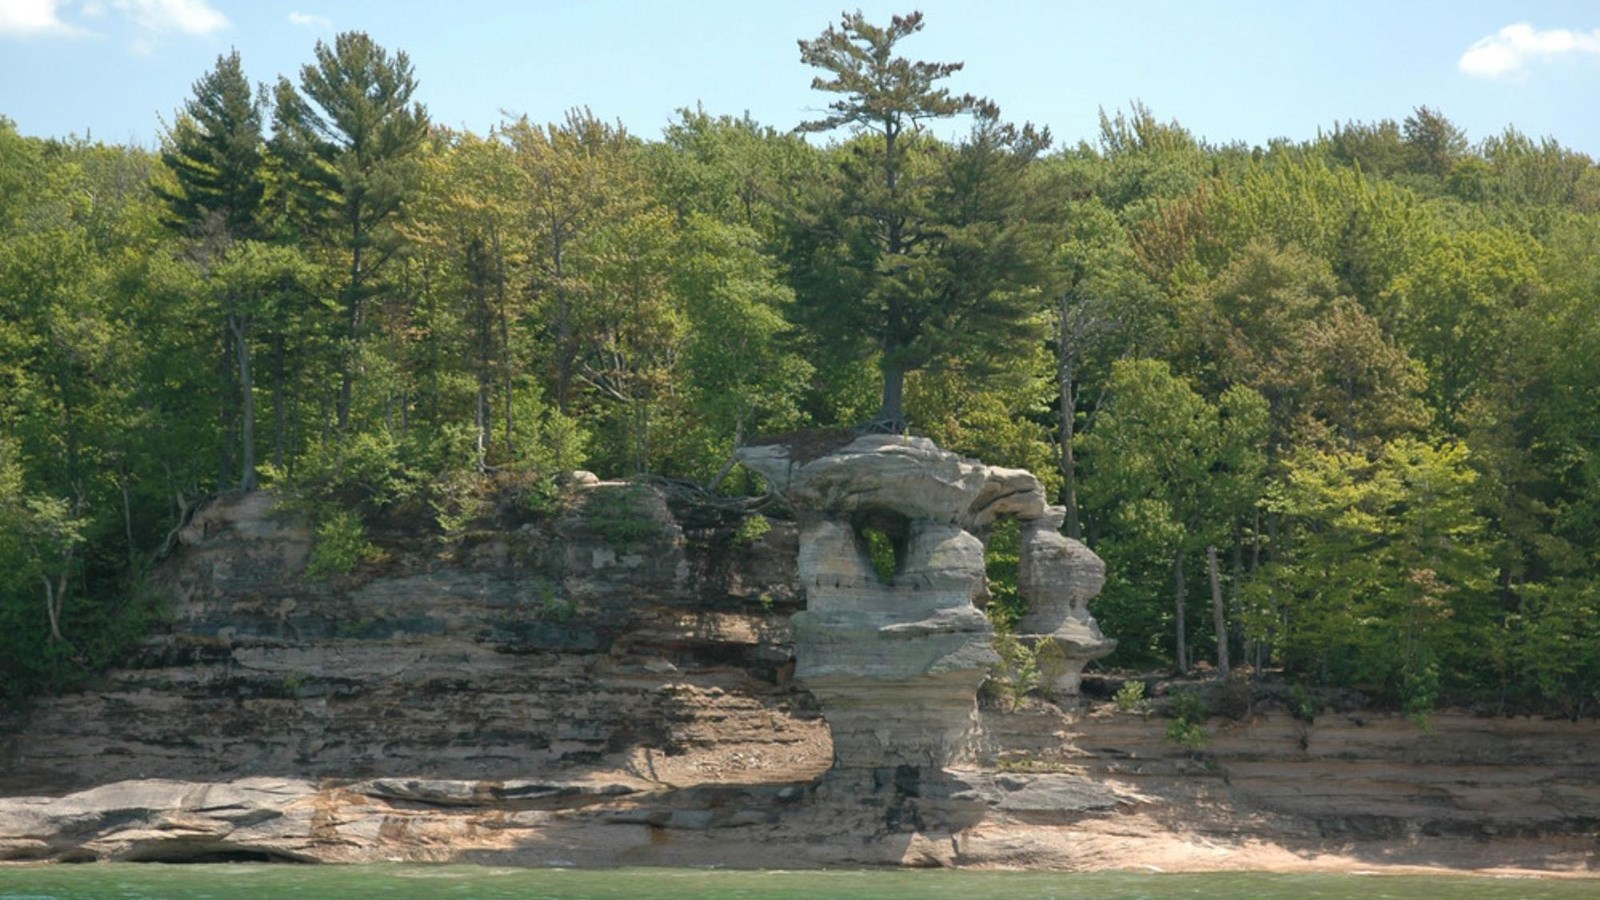 A lone pine tree survives atop Chapel Rock, an easily recognized formation of the Pictured Rocks.